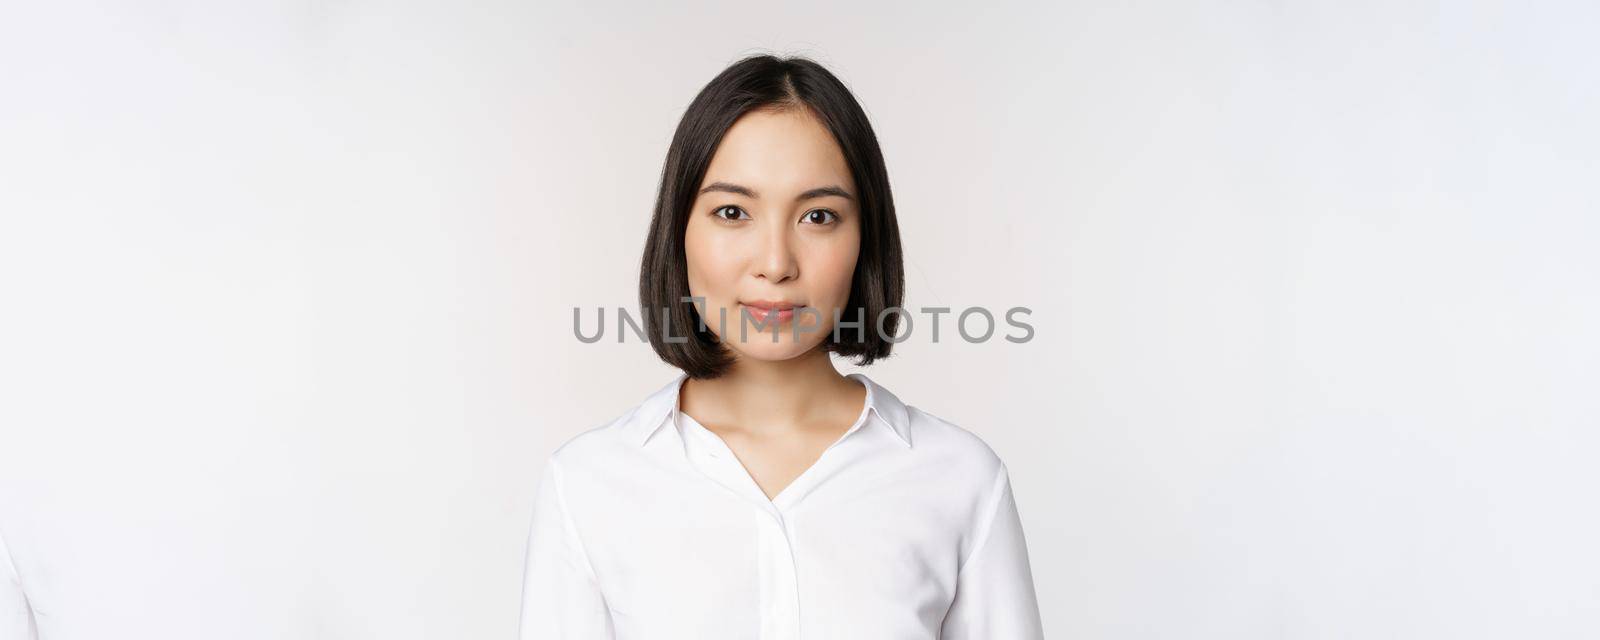 Close up portrait of korean young asian woman, professional, looking confident and assertive at camera, white background. Business people concept